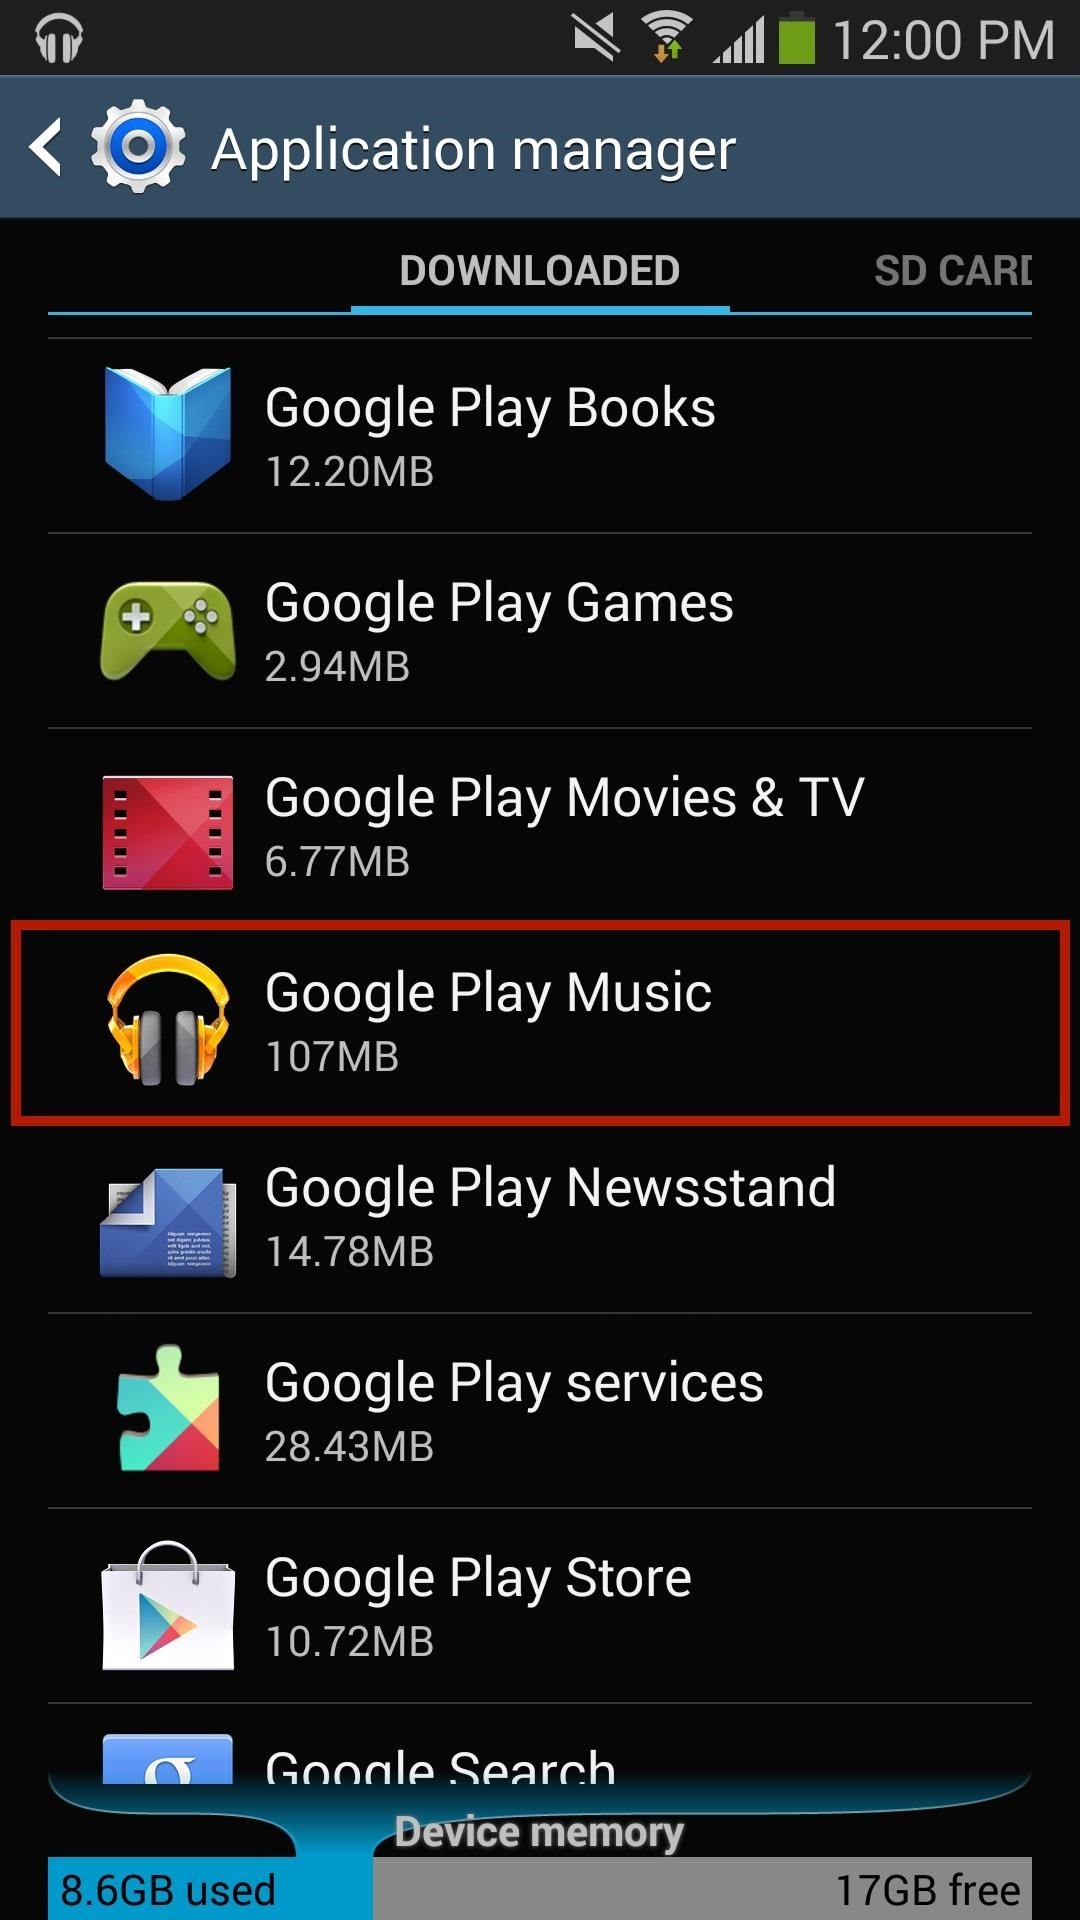 How to Fix The "Can't Play a Sideloaded Song Remotely" Error When Streaming Google Play Music to Chromecast